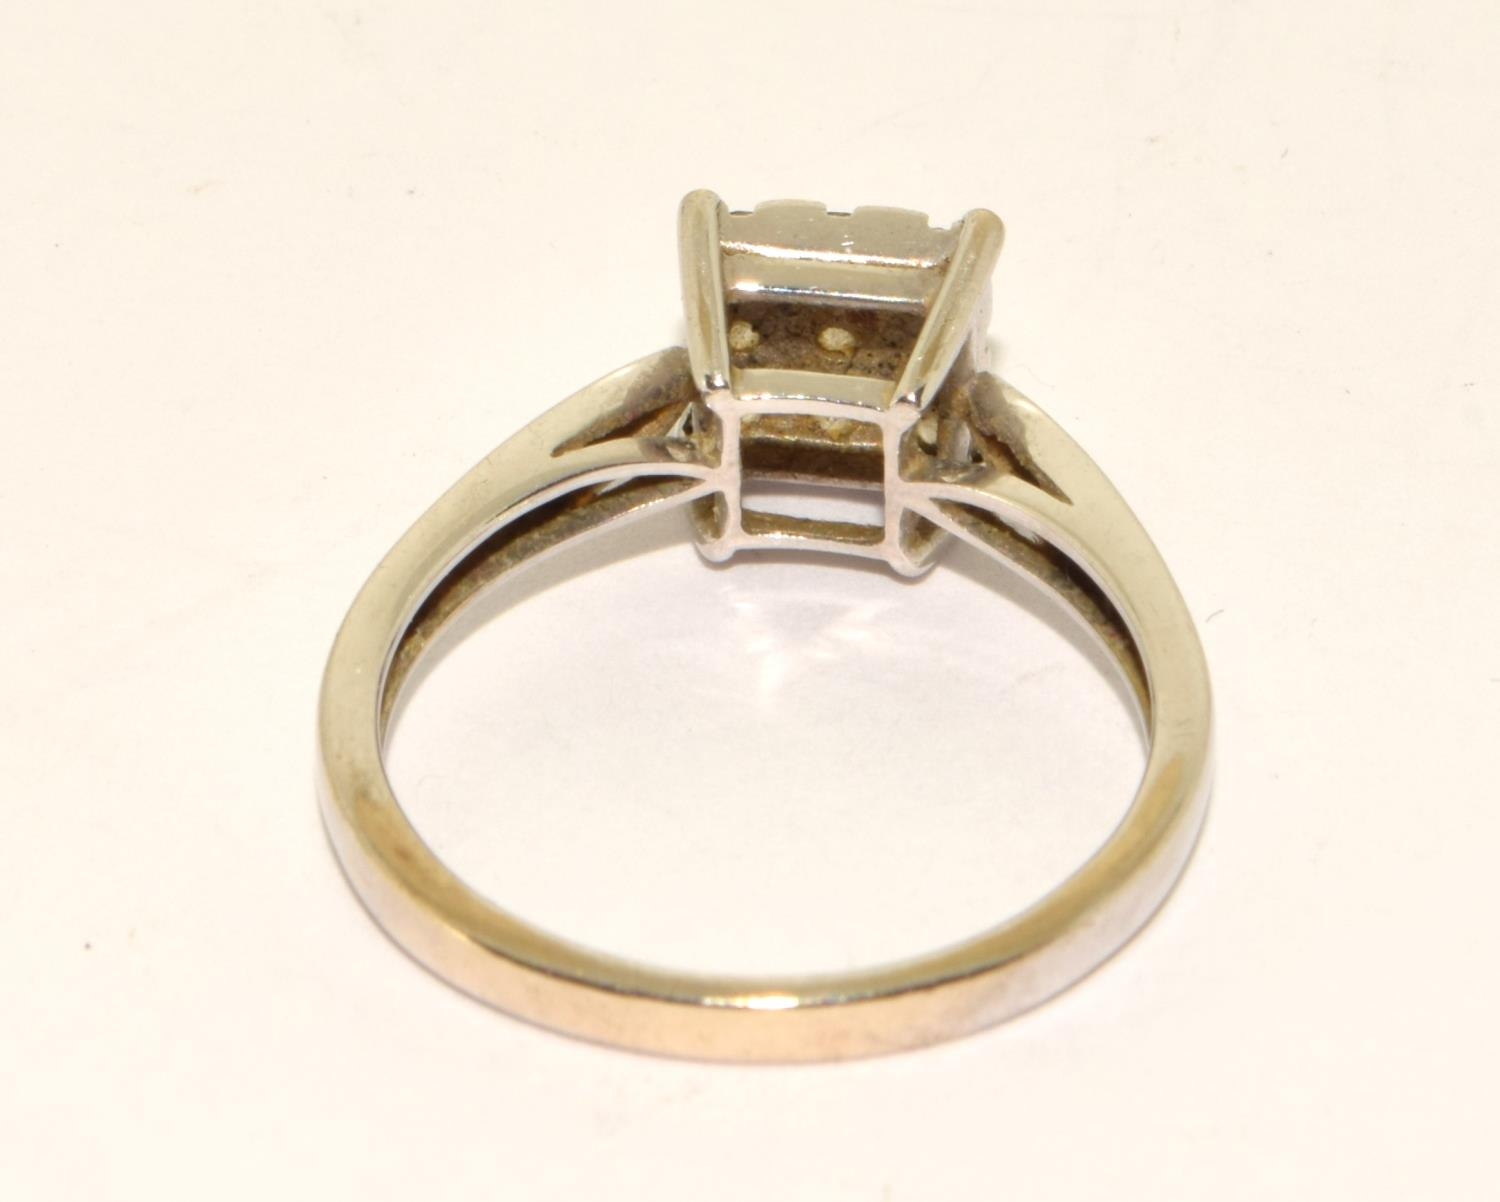 Diamond approx 0.33ct total 9ct gold ring 2.3g size N - Image 3 of 5